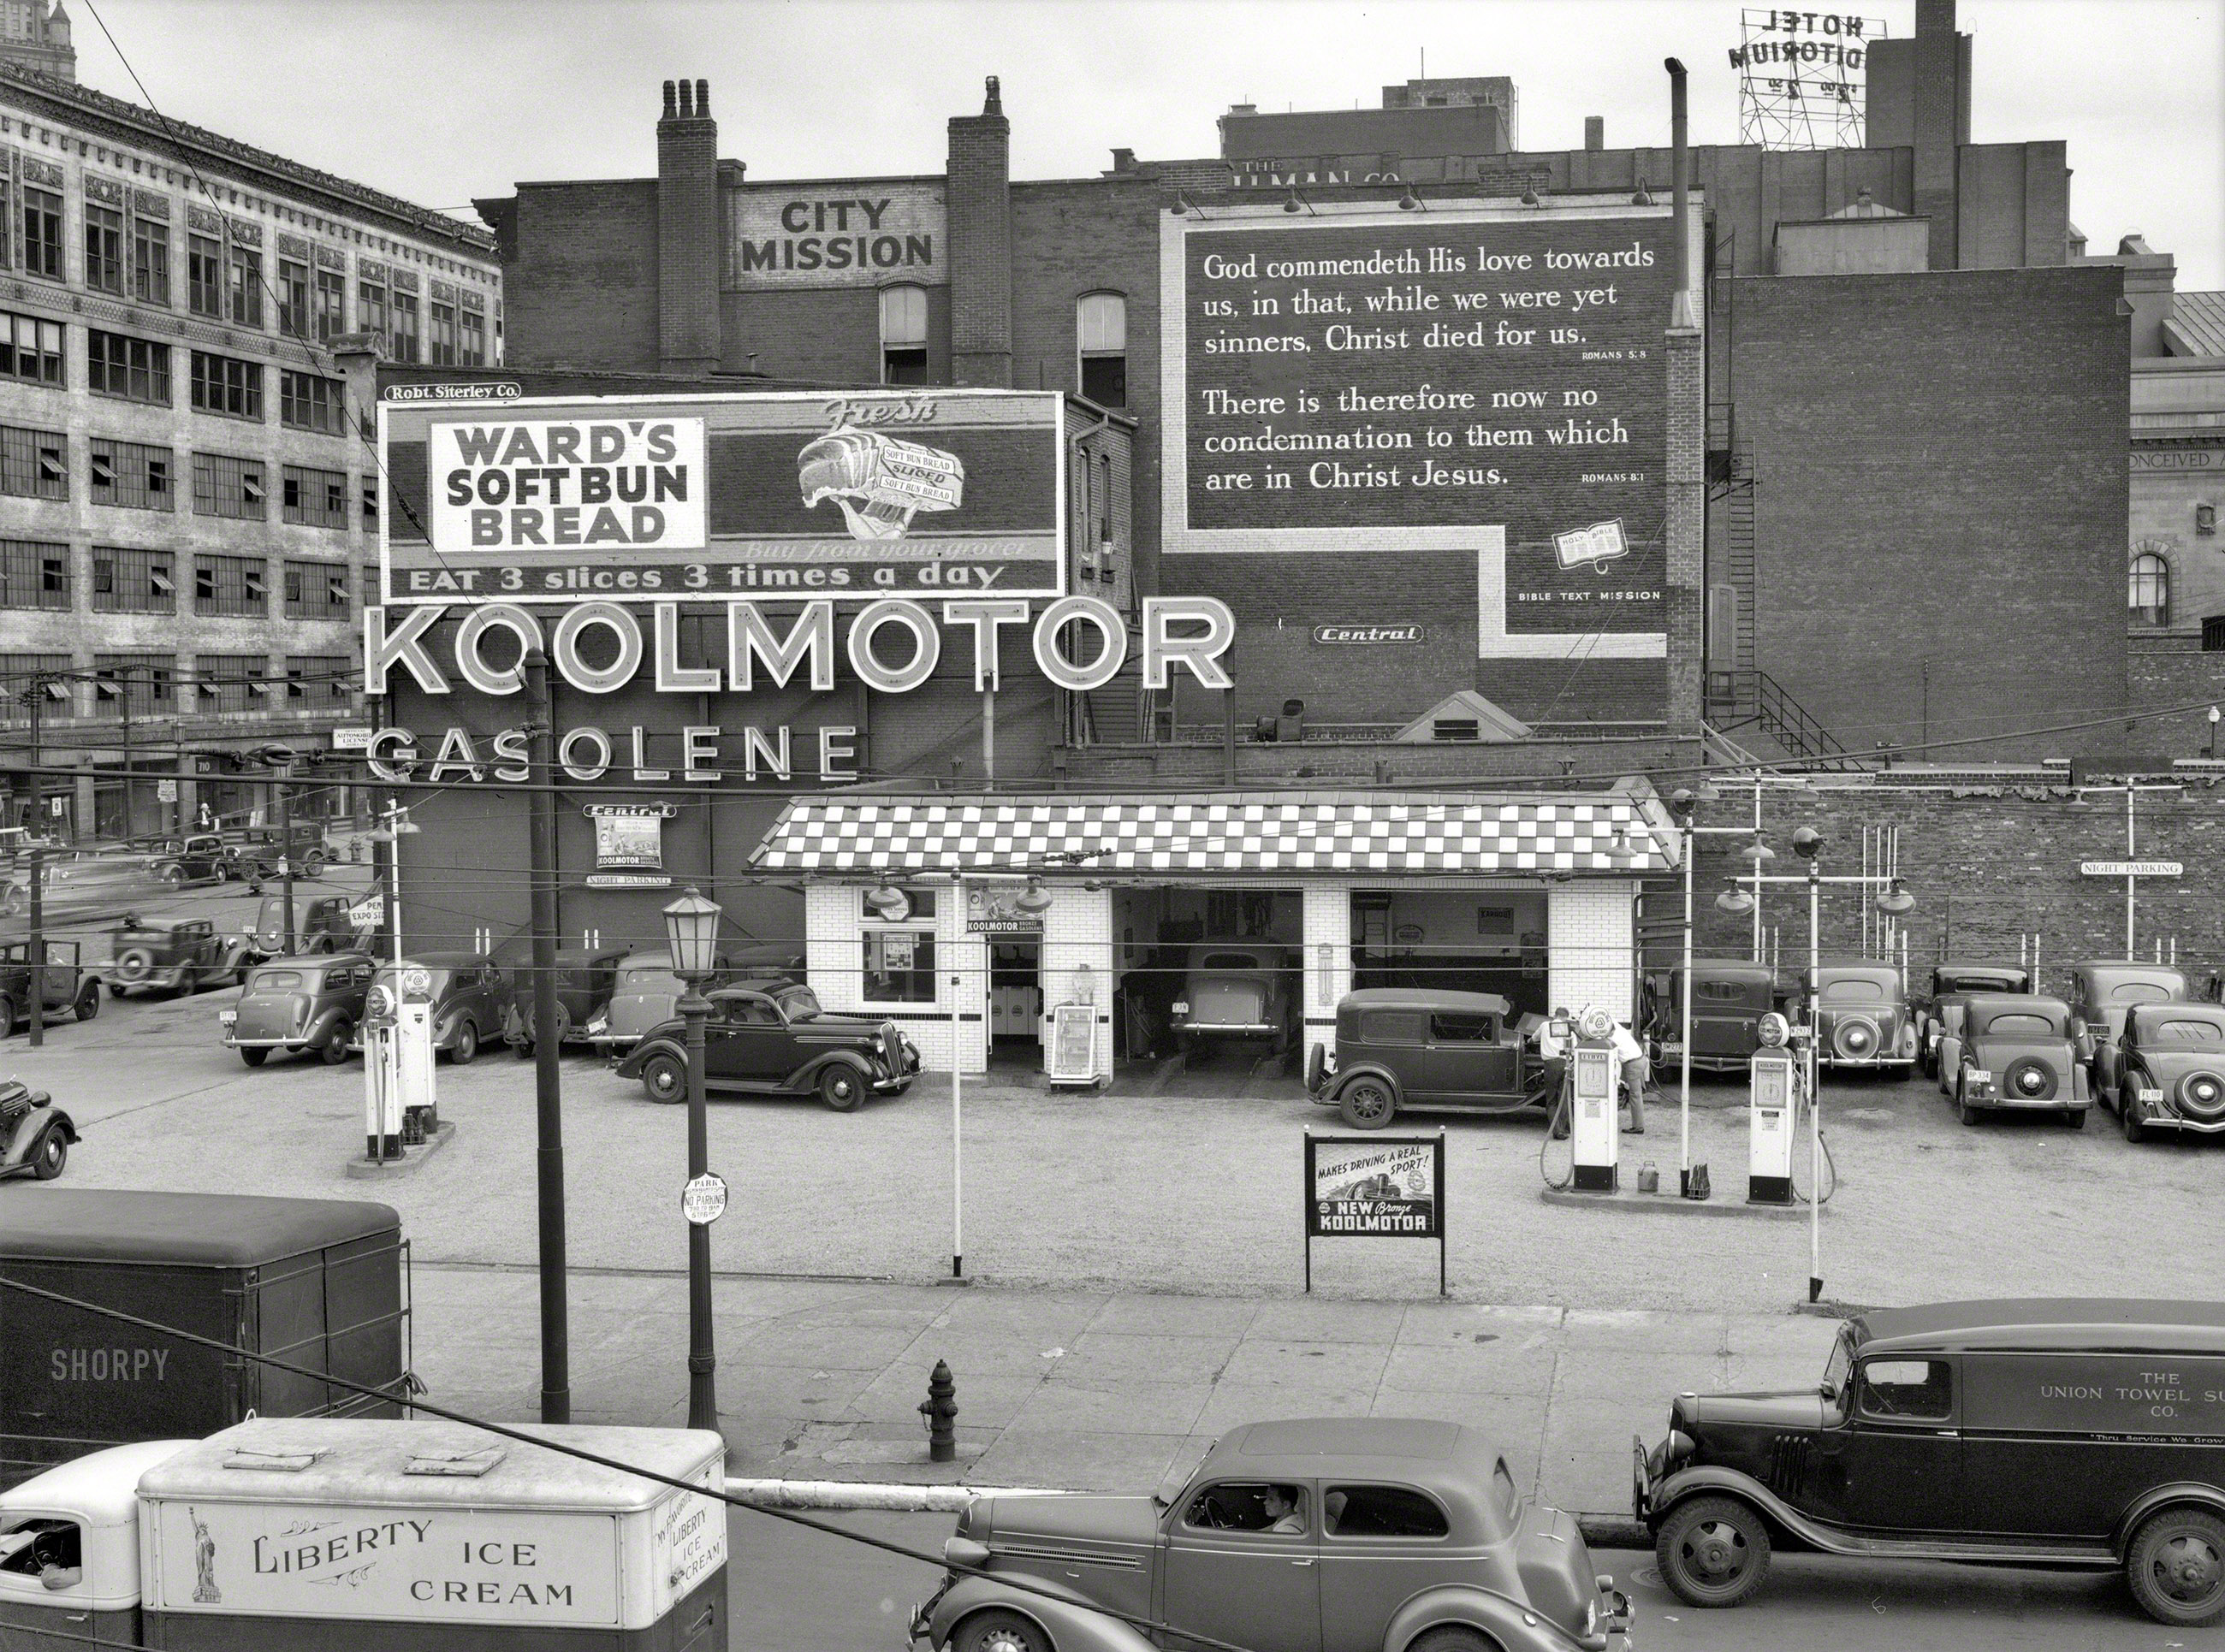 August 1937. "Gas station and gospel mission in Cleveland, Ohio." In addition to Koolmotor "Gasolene," a long-defunct Cities Service brand, we also seem to have at least a couple of the major food groups represented here, as well as two verses from the New Testament. Photo by John Vachon. View full size.